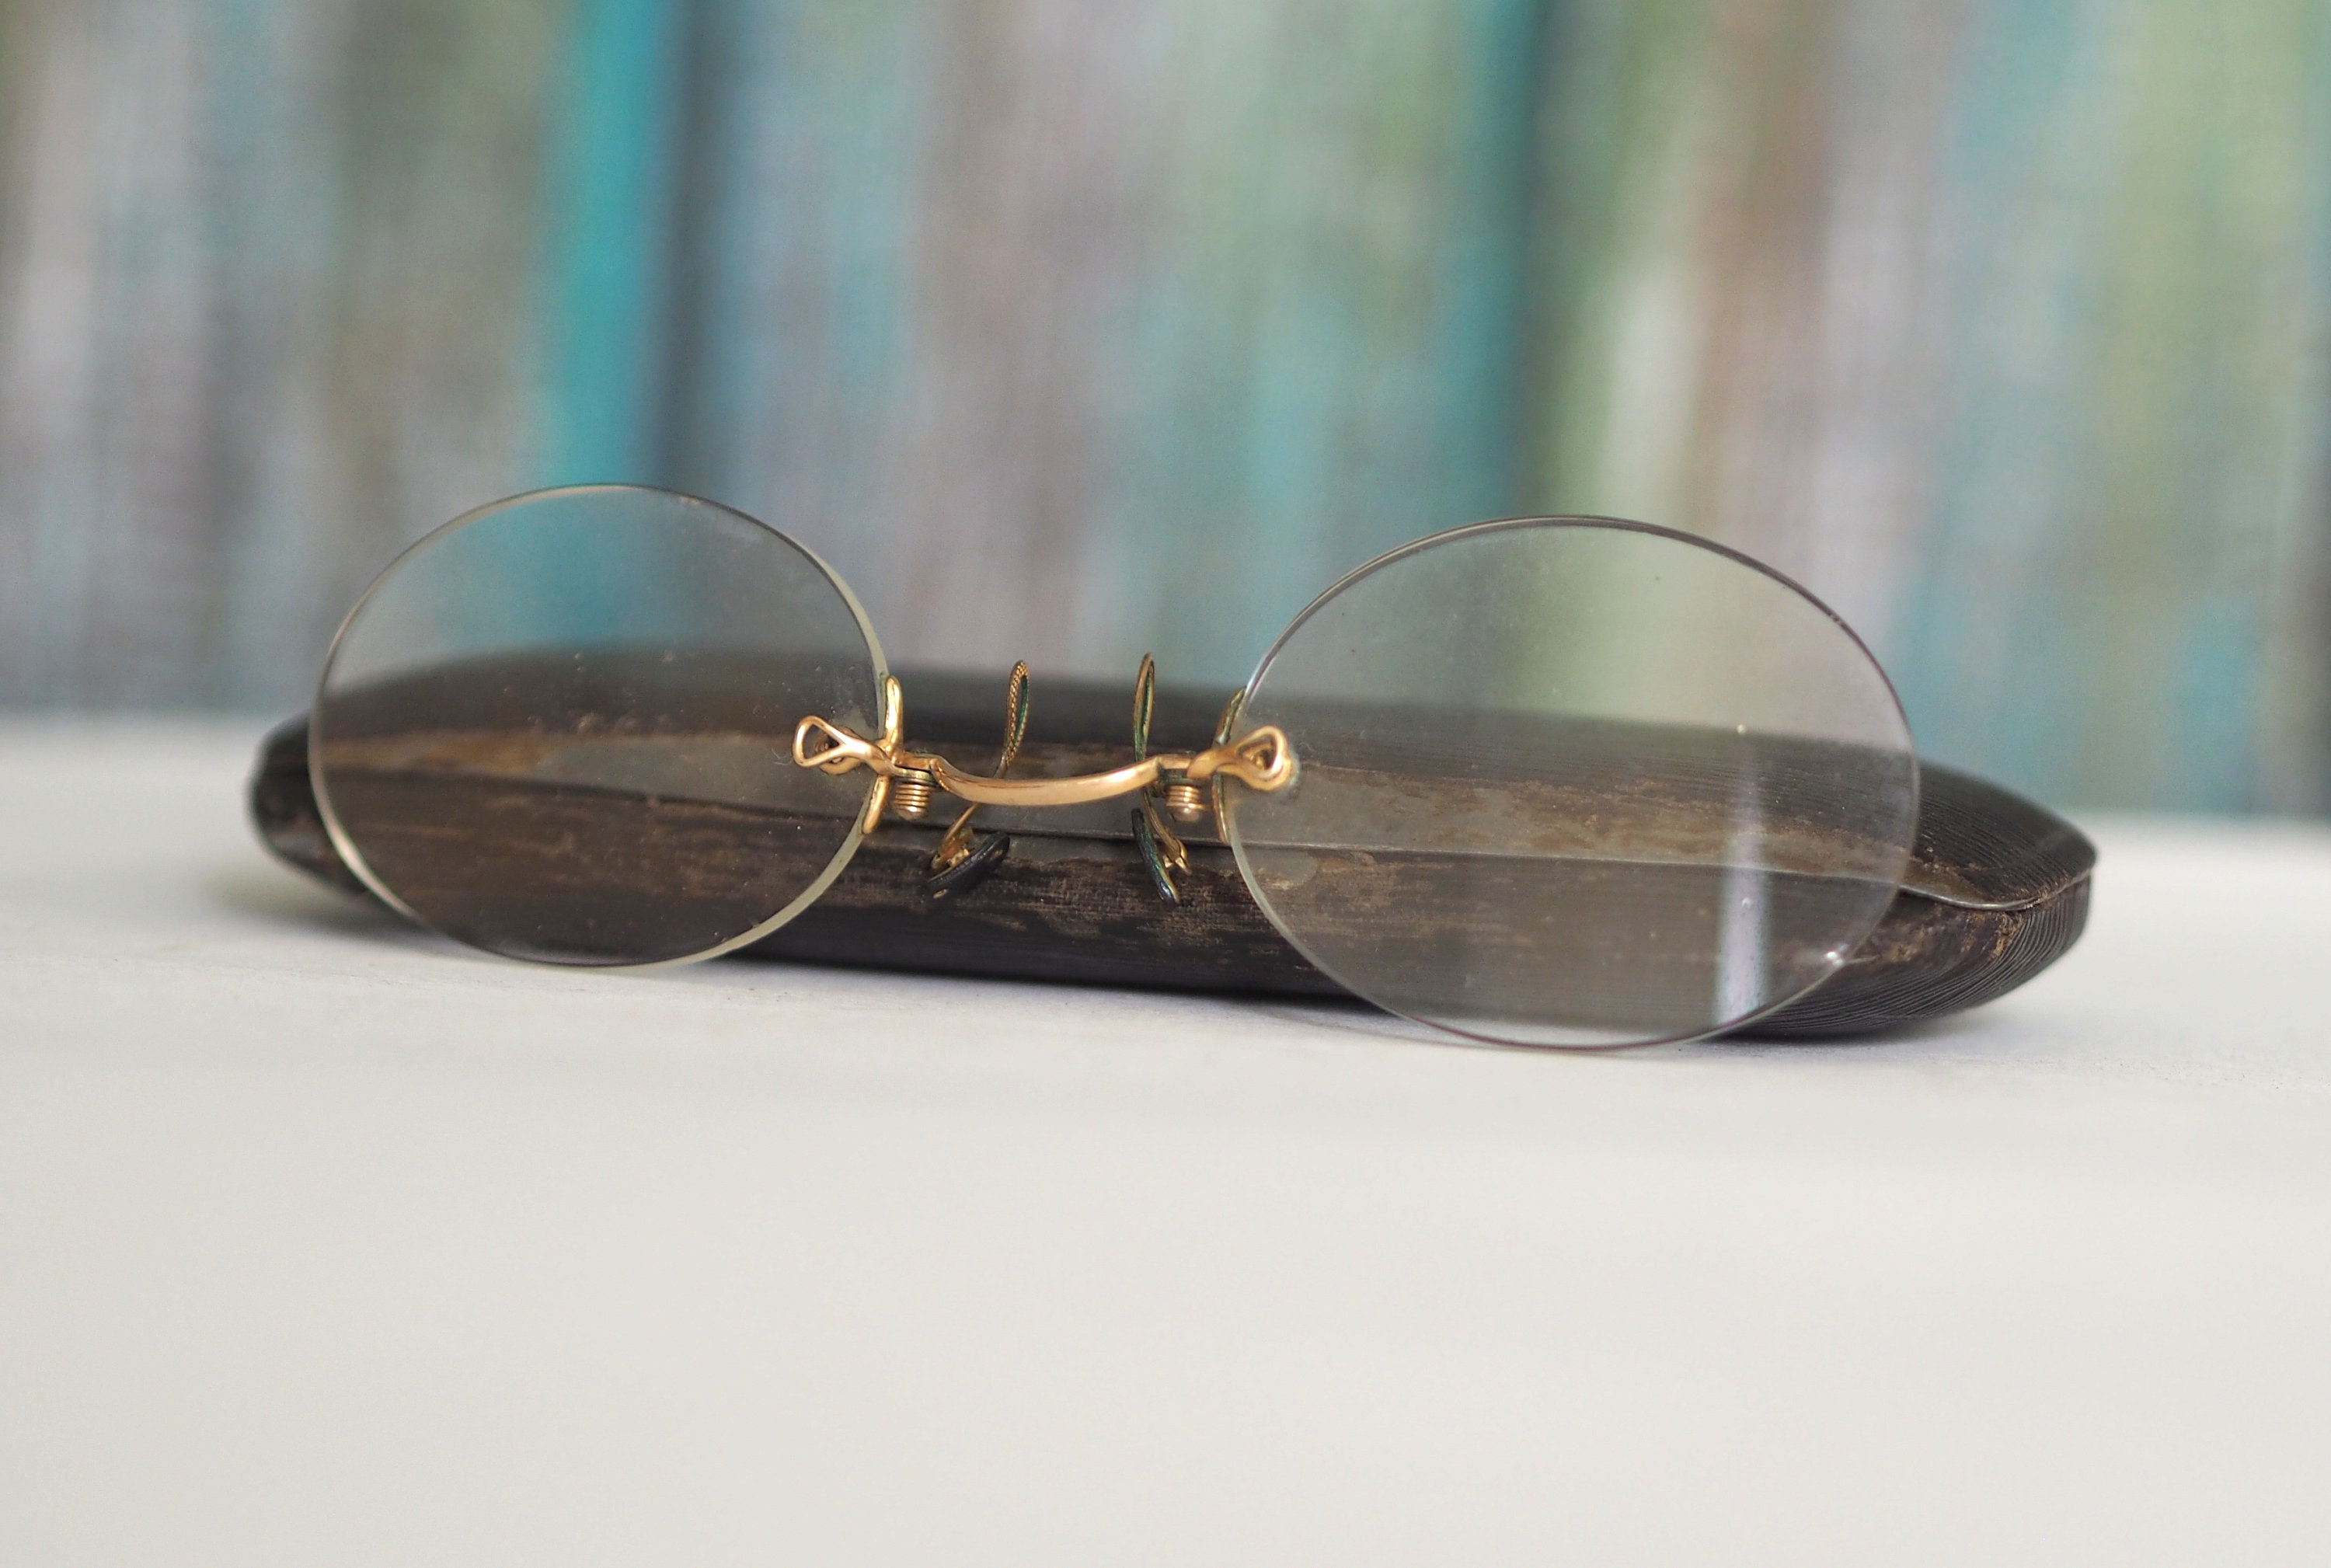 Pince-Nez Glasses  Science Museum Group Collection